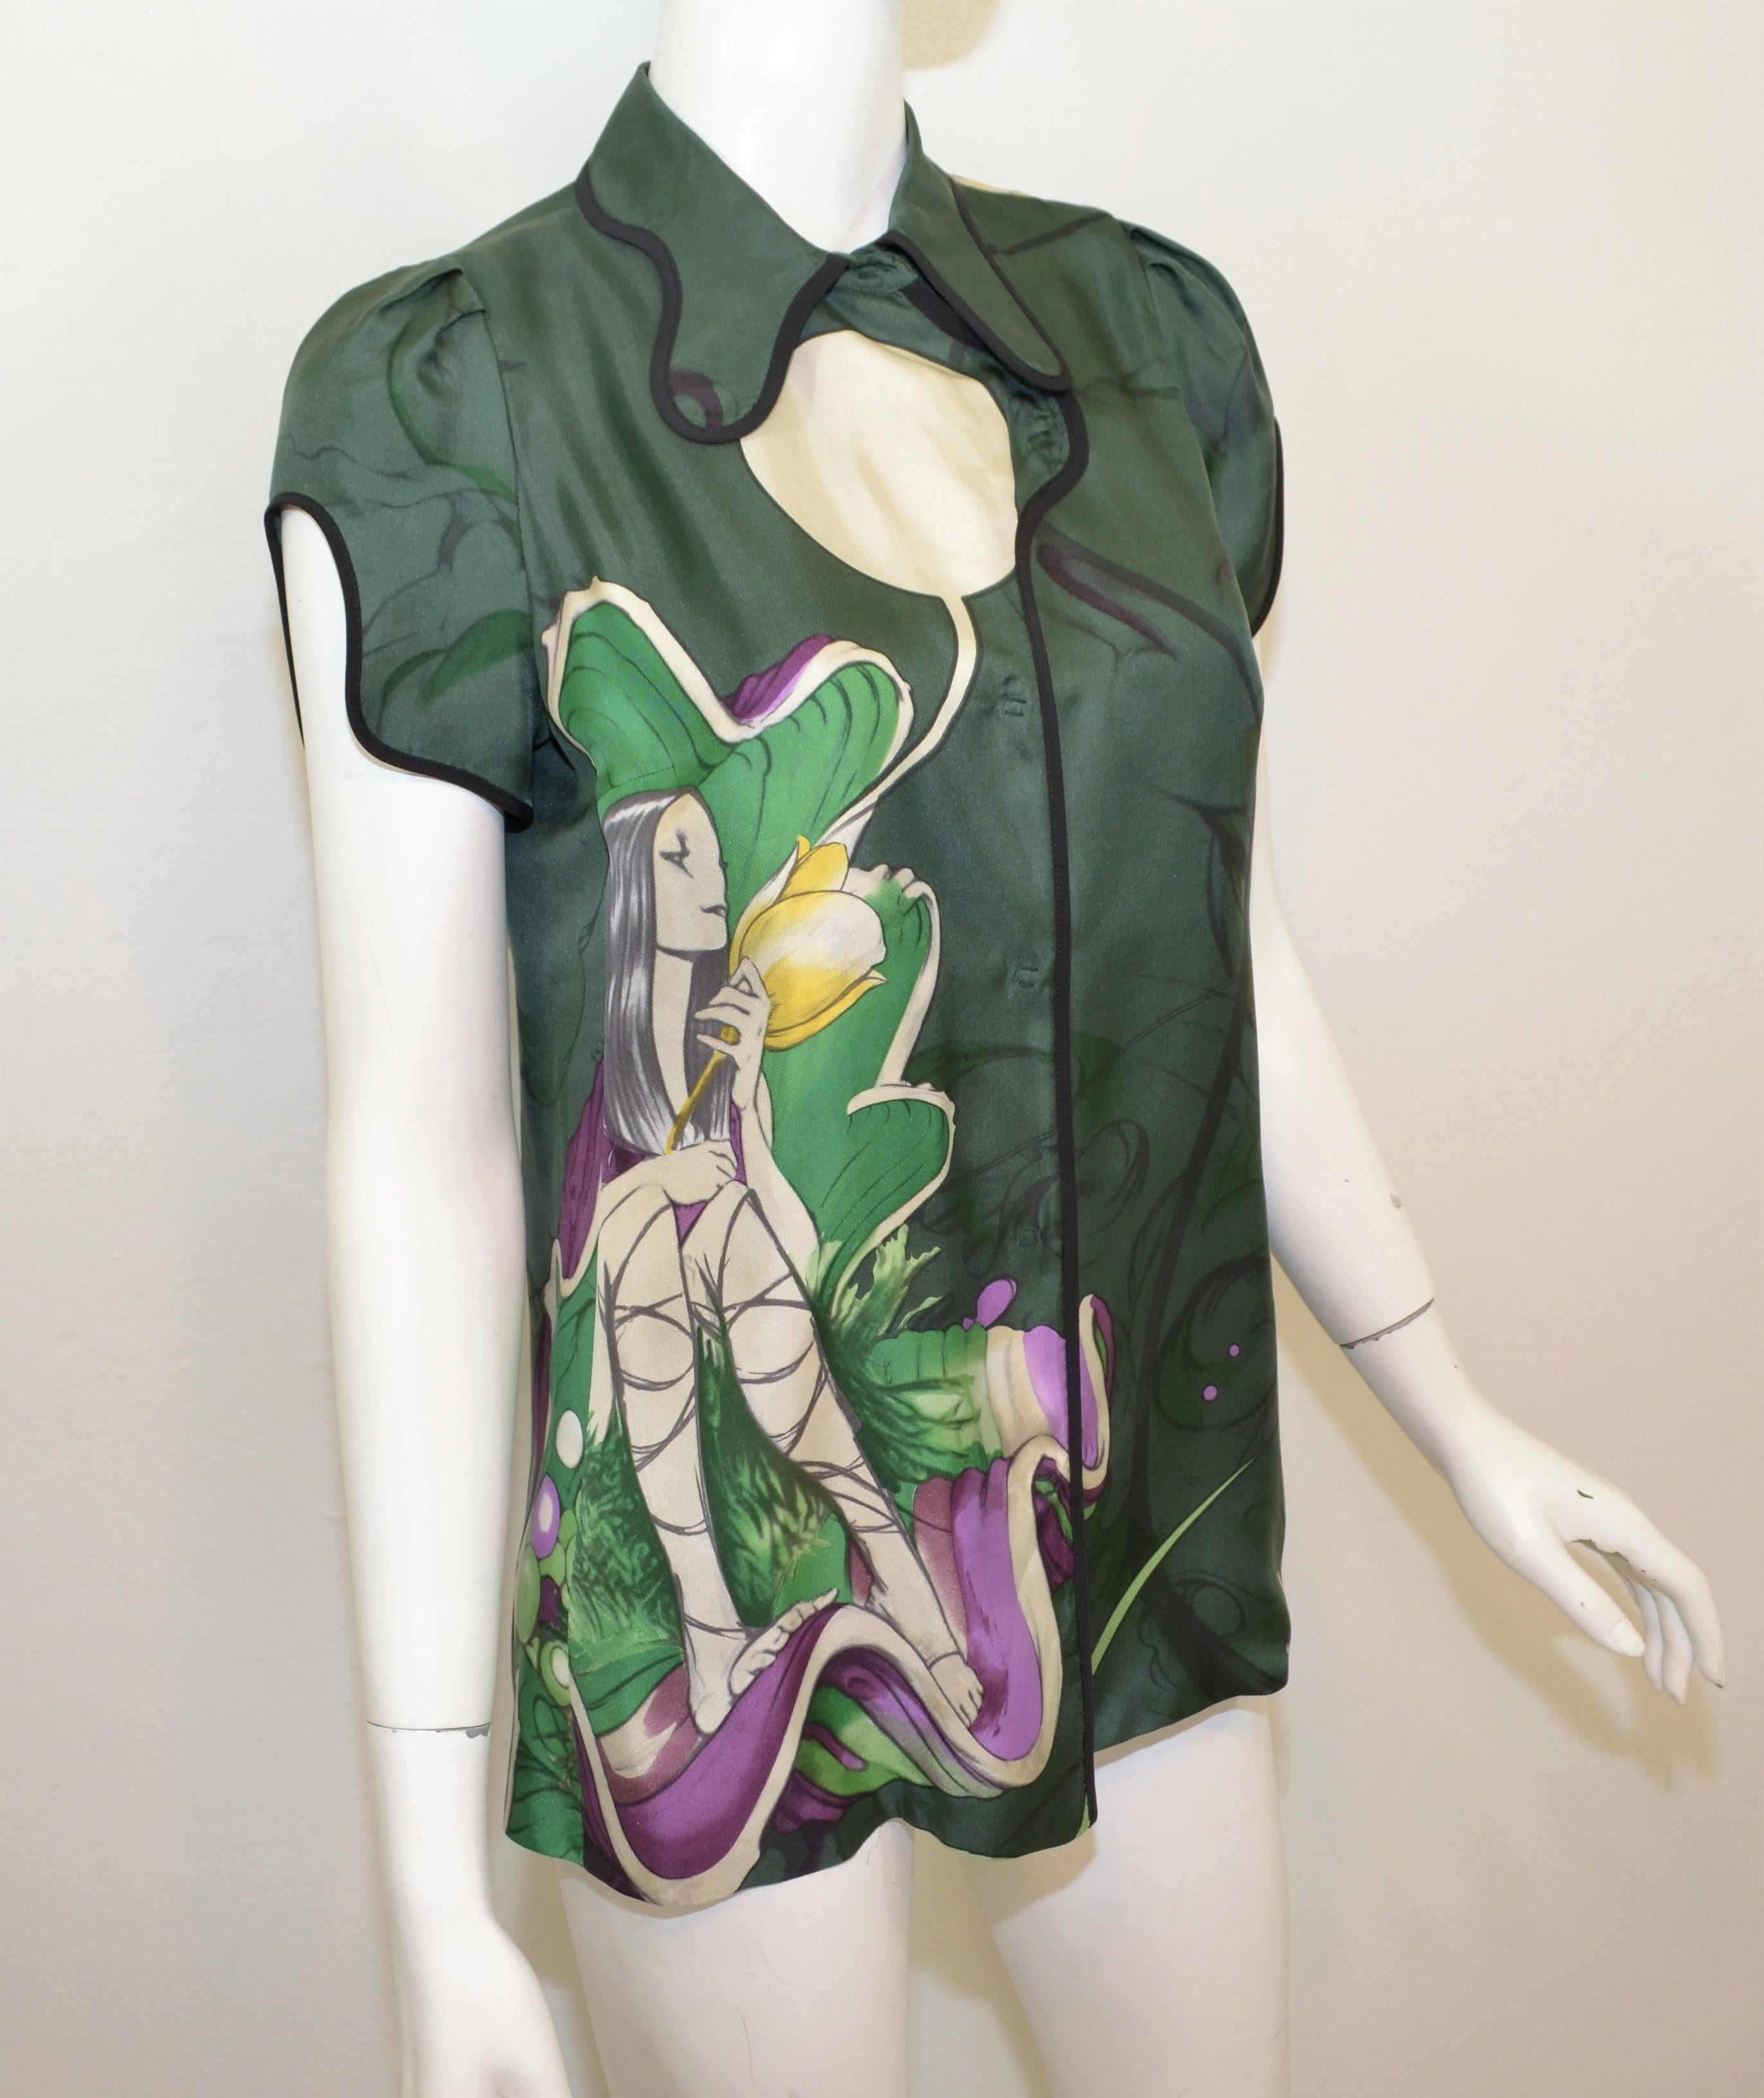 Prada printed silk blouse by artist James Jean, Taiwanese American visual artist, in collaboration with Prada featured in green with a unique fairy print, cap sleeves and snap button fastenings. 100% silk, size 42, made in Italy.

Measurements:
Bust